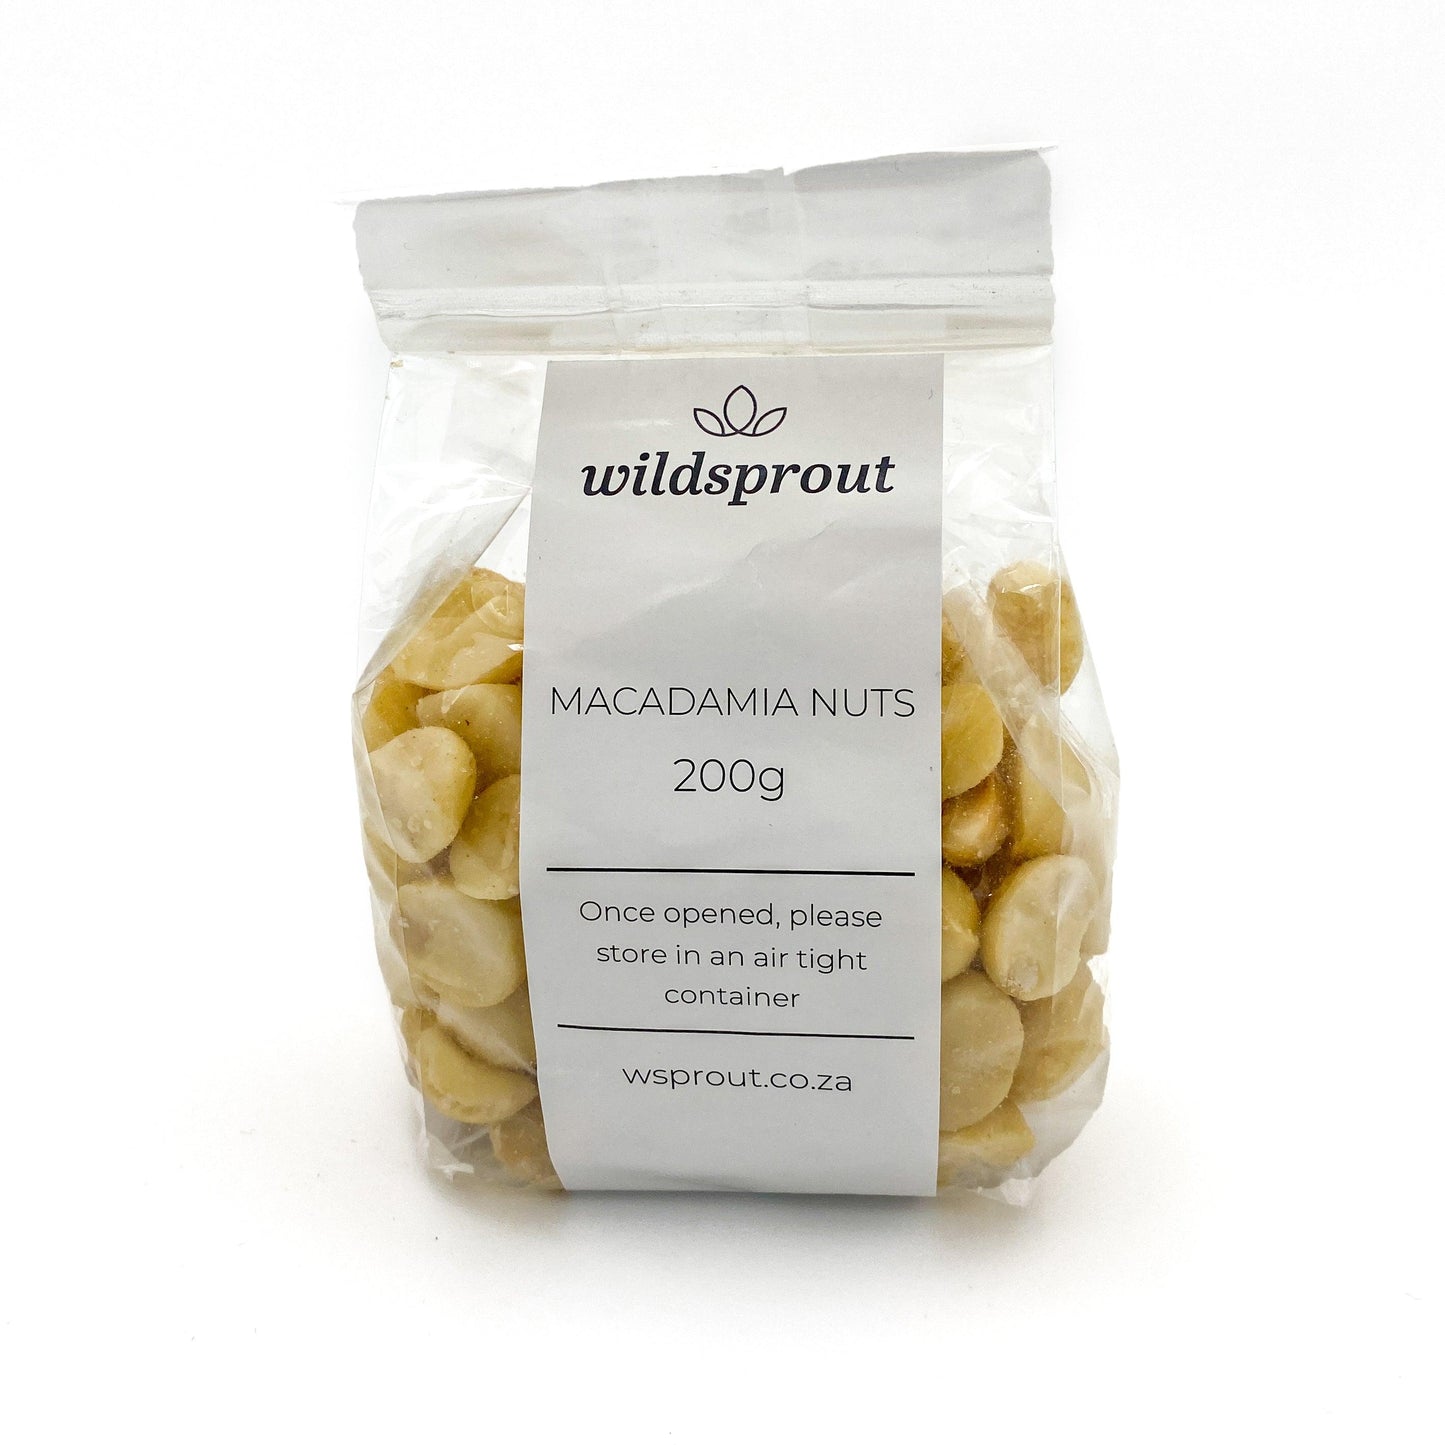 Macadamia Nuts 200g - Wildsprout